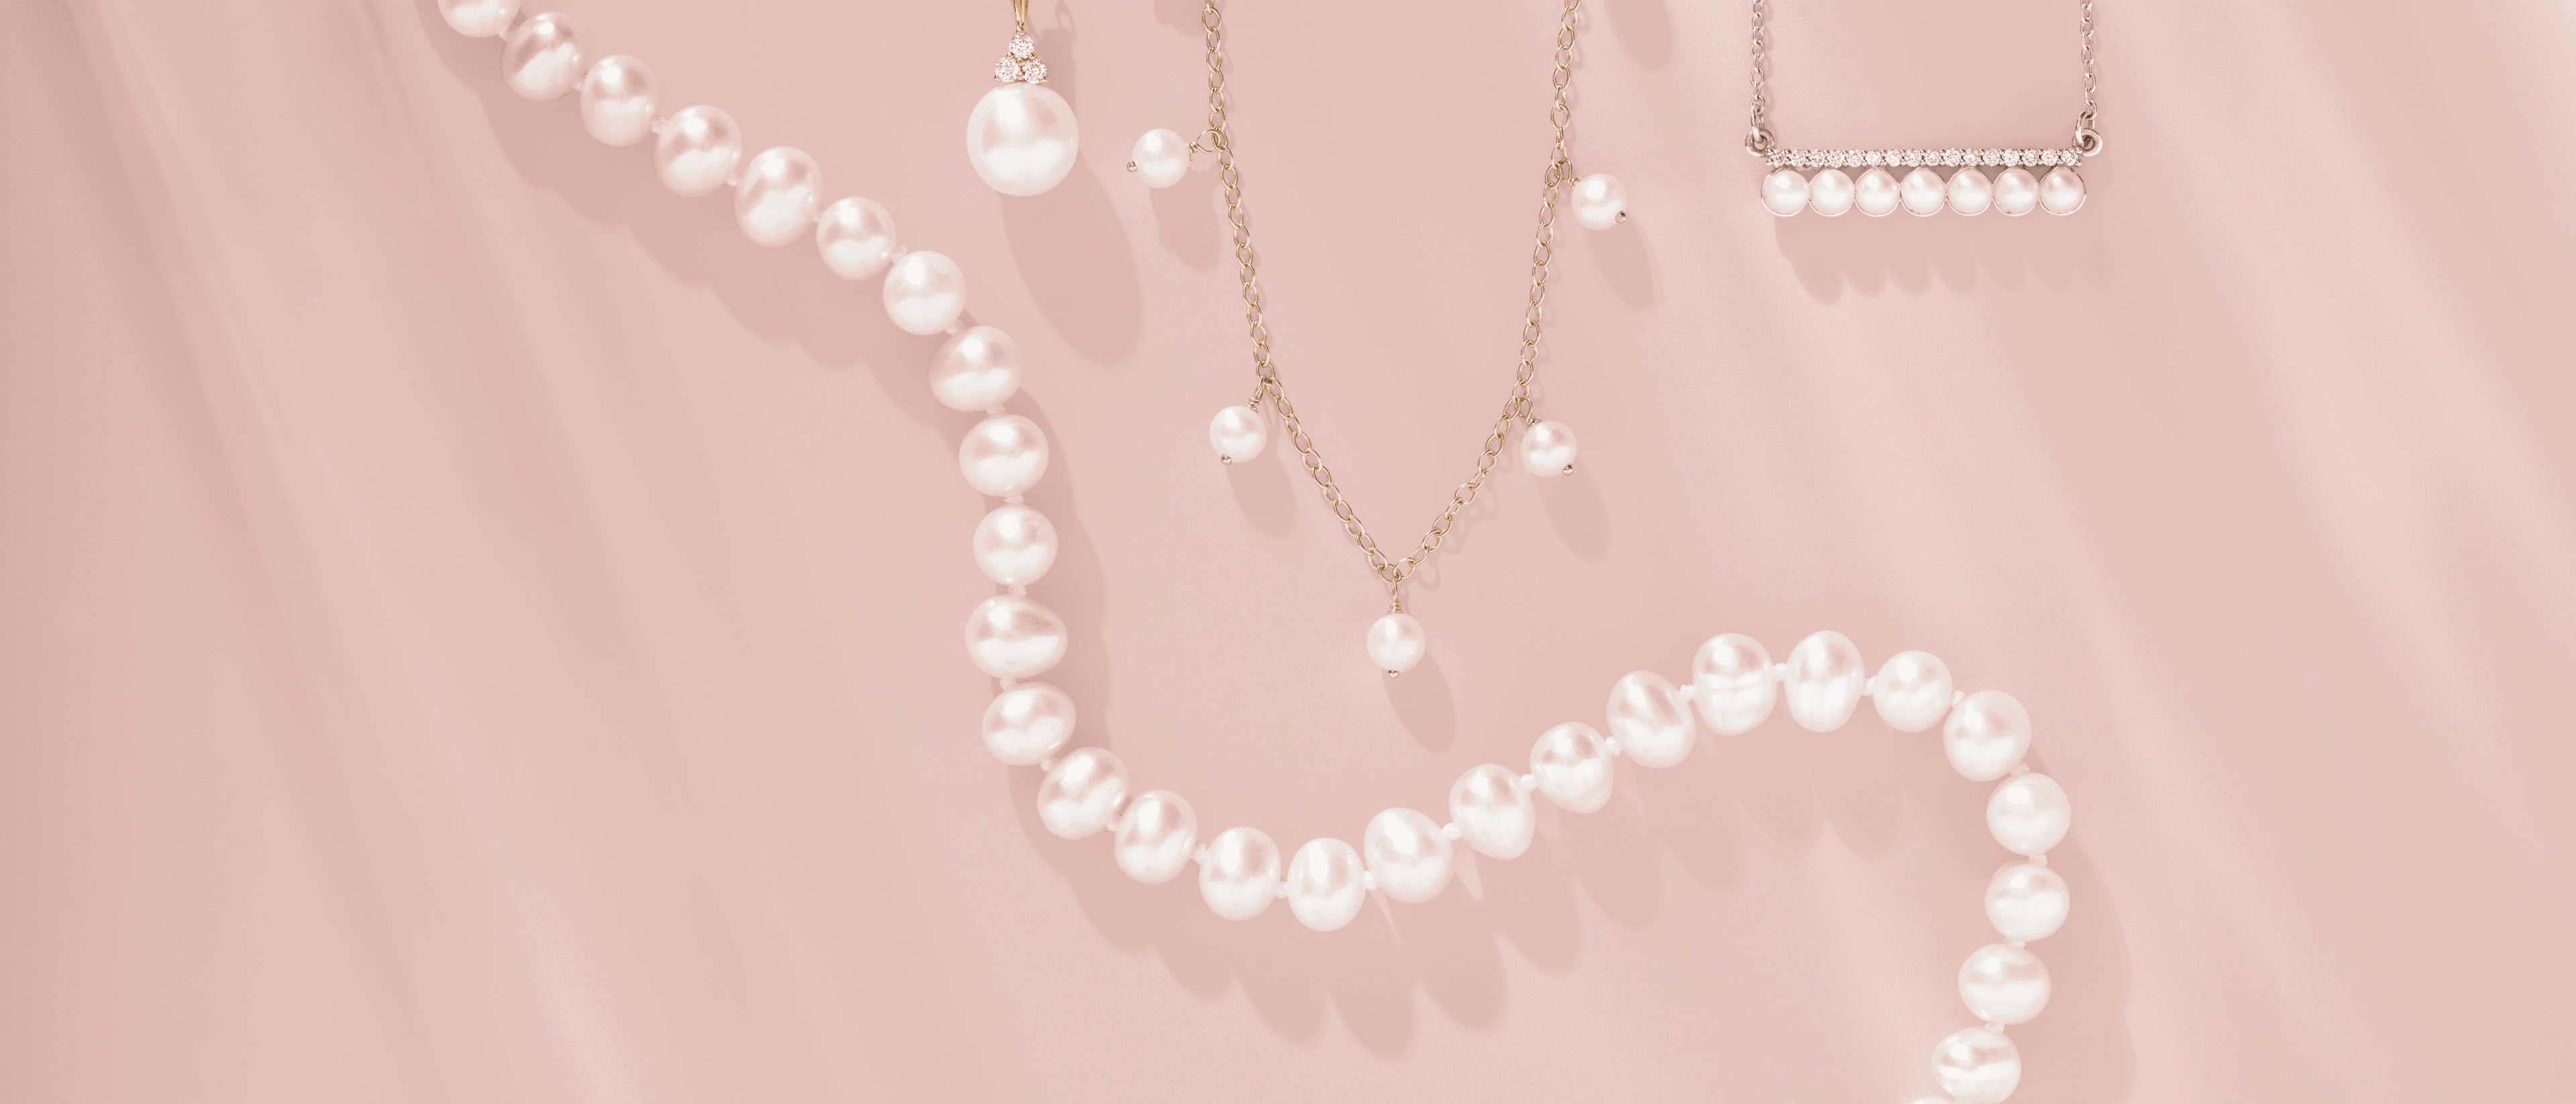 Assorted pearl jewelry, such as a string, two necklaces, and a pendant, against a pink background